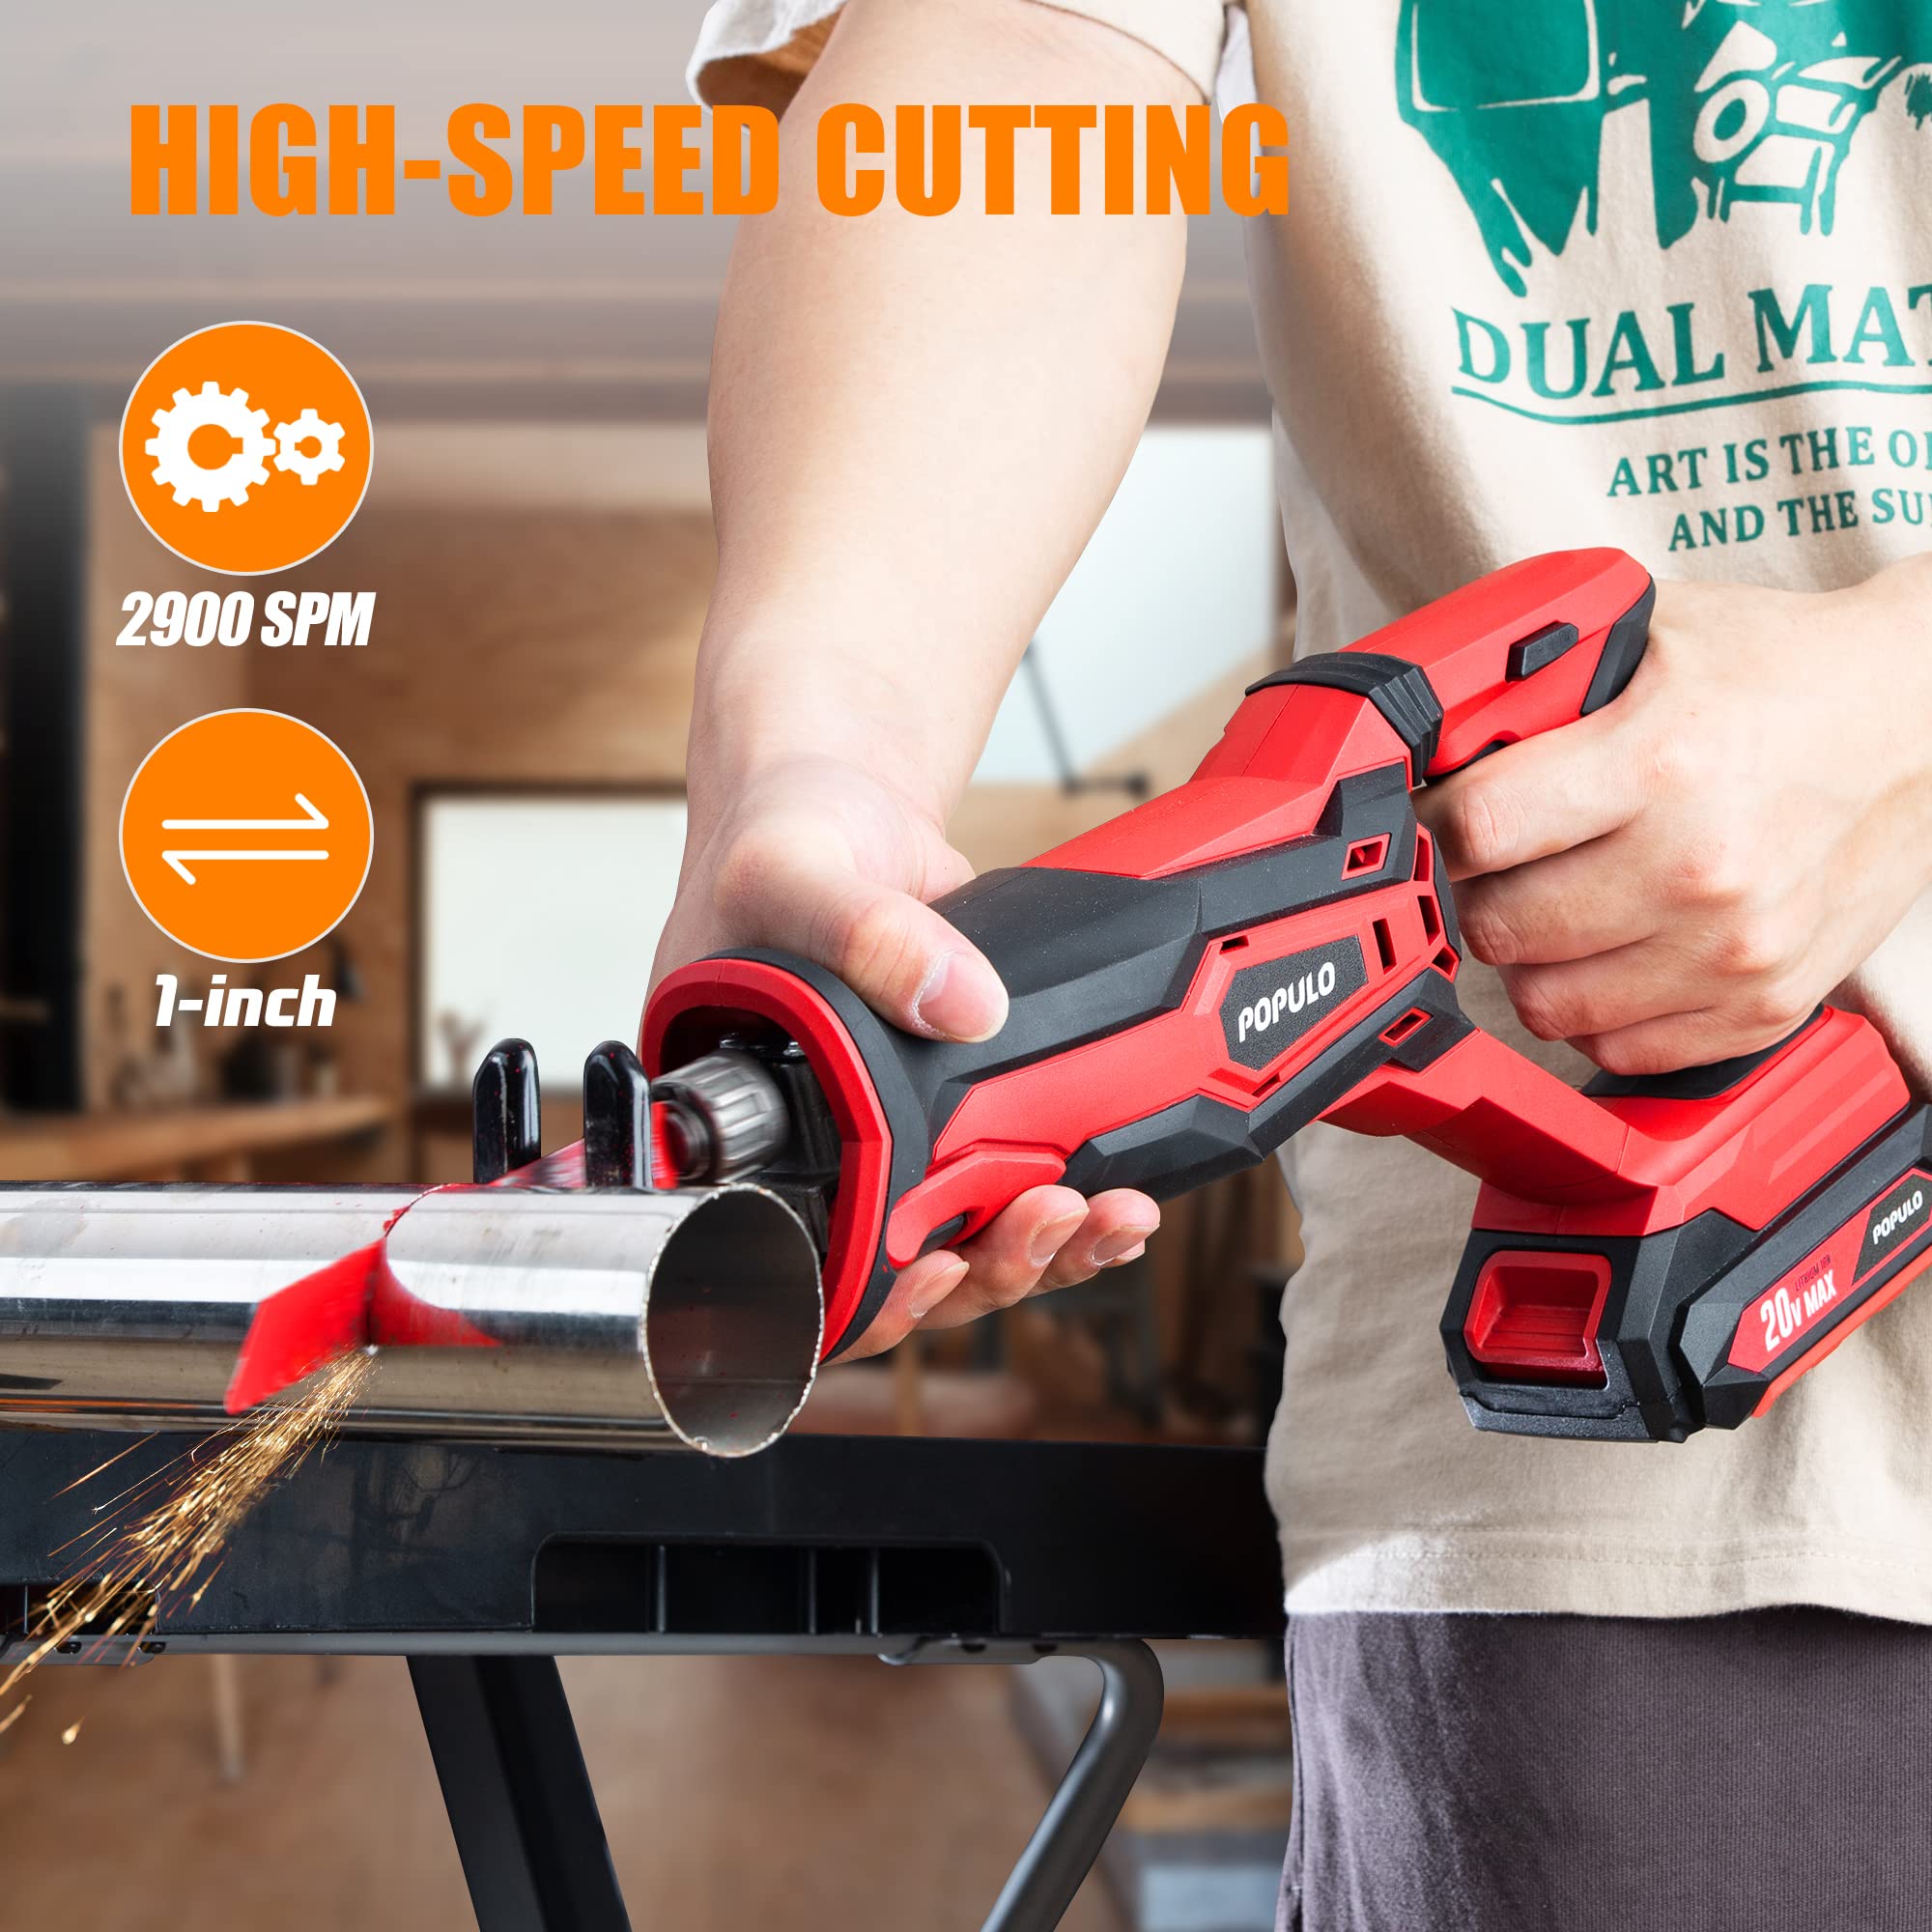 POPULO Cordless Reciprocating Saw, 20V MAX 2.0Ah Battery Power Saw, Electric Saws All Saw for Wood, Trees, or Metal Cutting, Cordless Saw with Battery and Charger